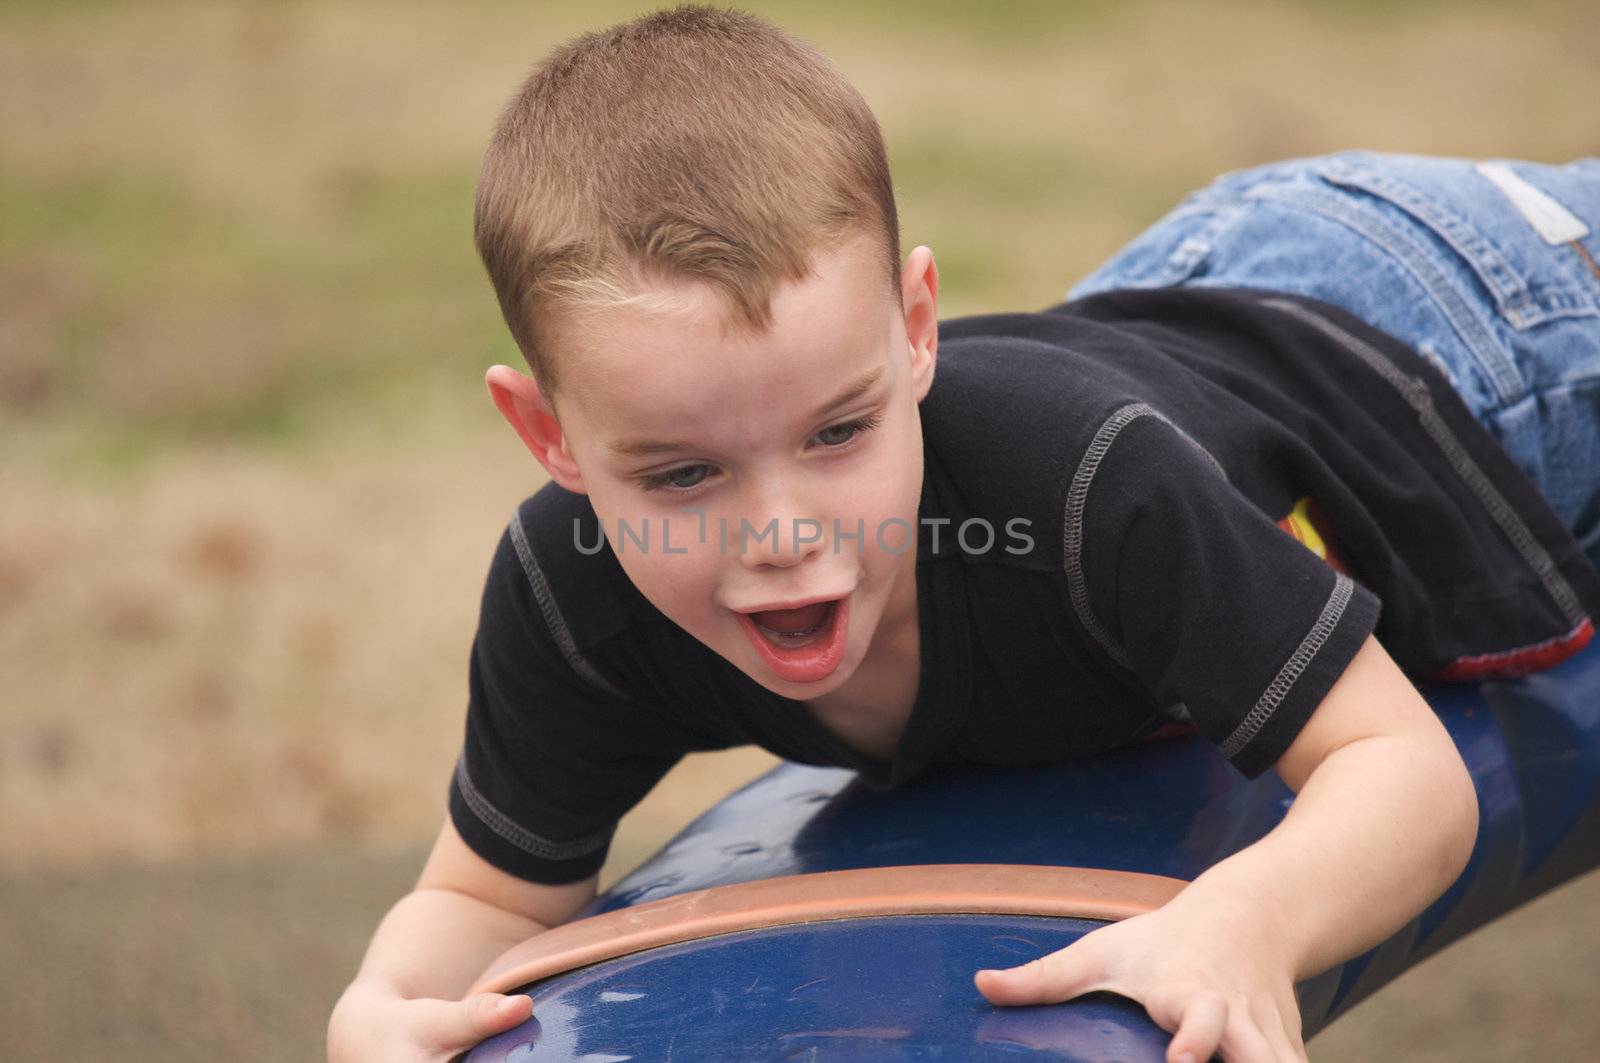 Adorable Child Having Fun Playing at the Playground